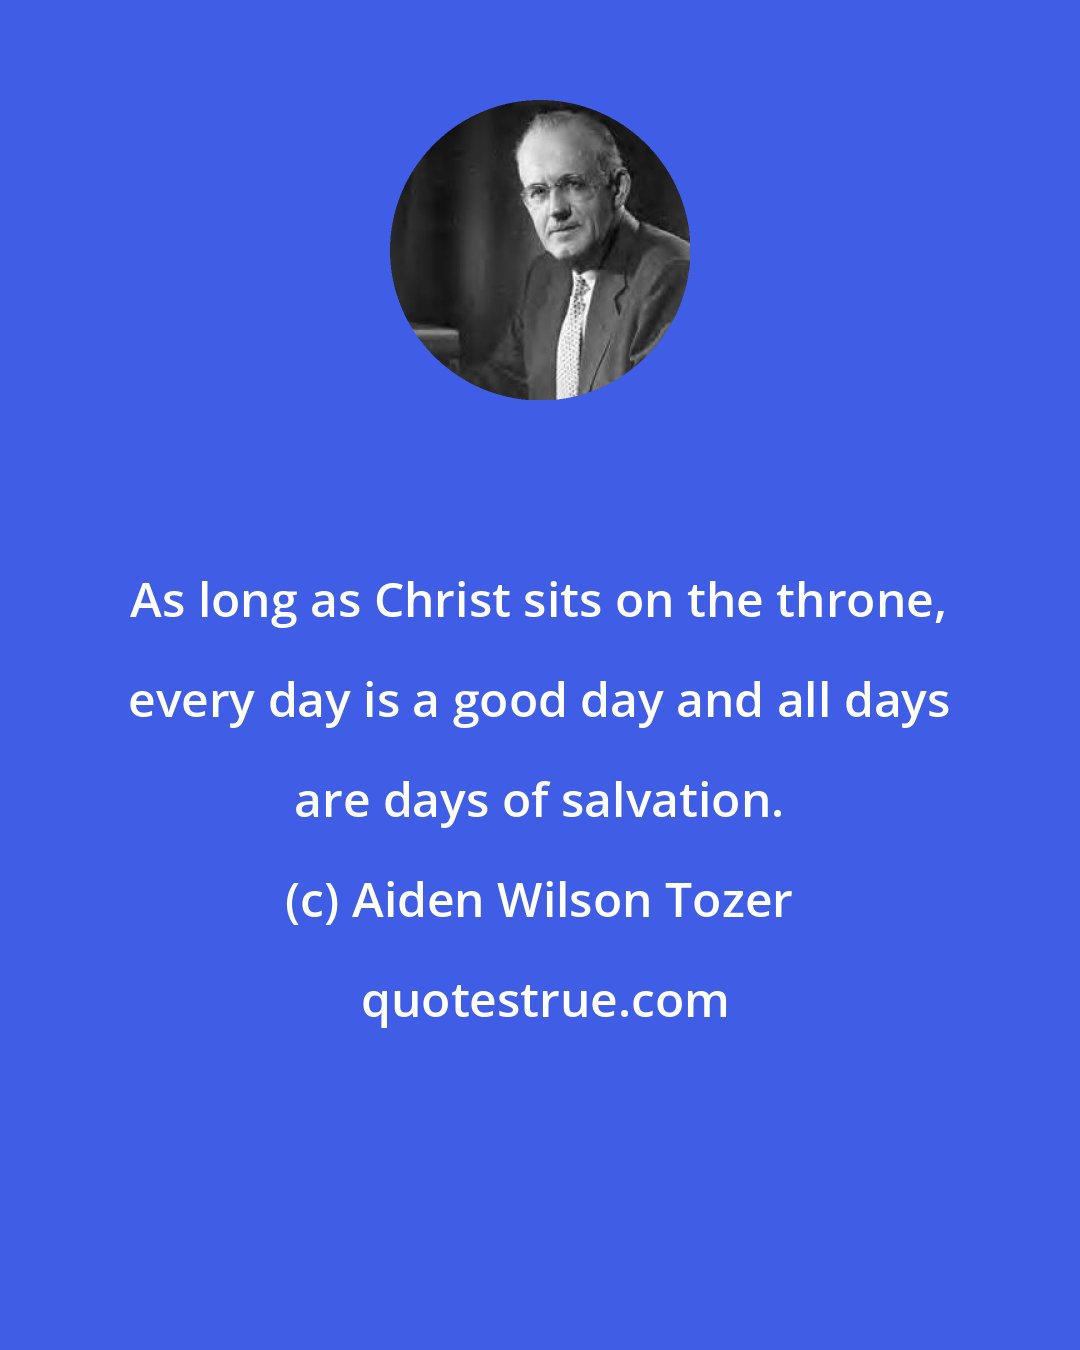 Aiden Wilson Tozer: As long as Christ sits on the throne, every day is a good day and all days are days of salvation.